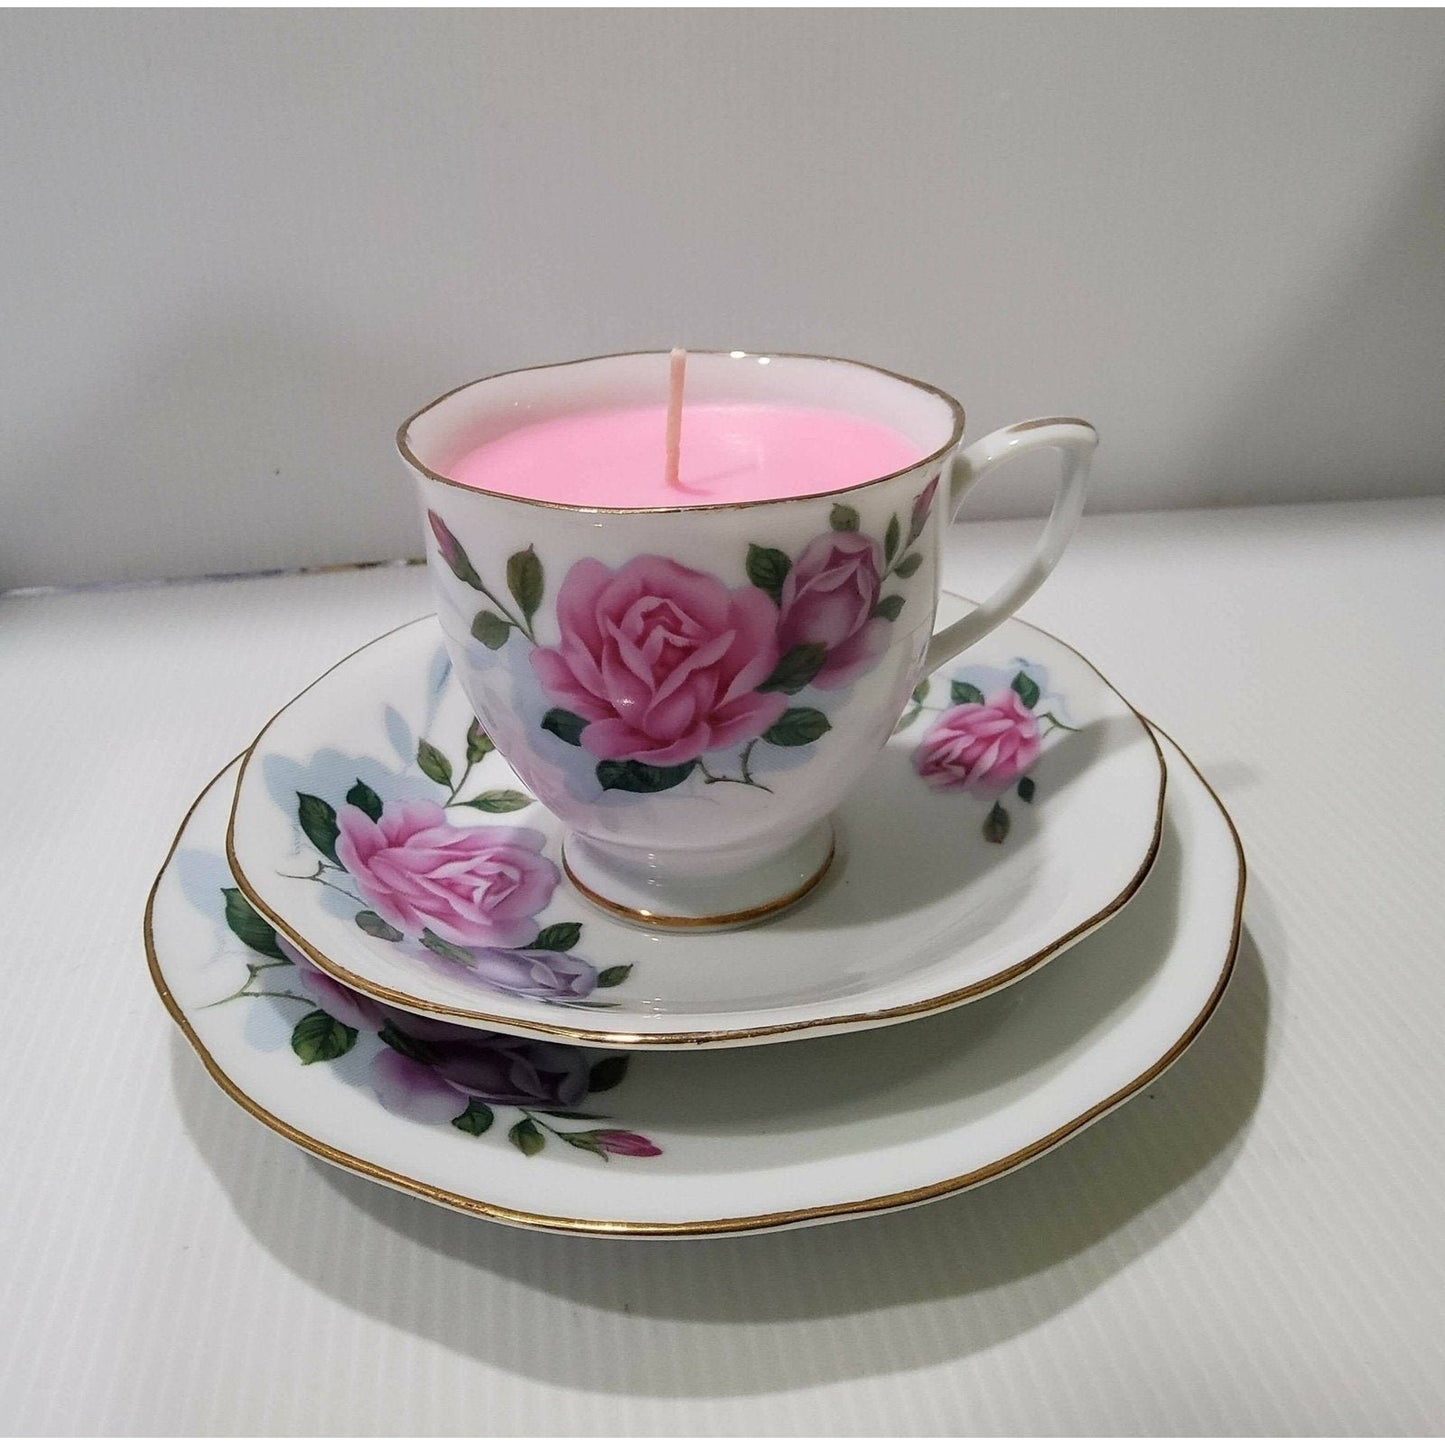 Teacup Candle - Handpoured soy candle - vintage china - English Peony & Blush Suede Teacup Candle - Soy Candle - Free Shipping - AMD Touring